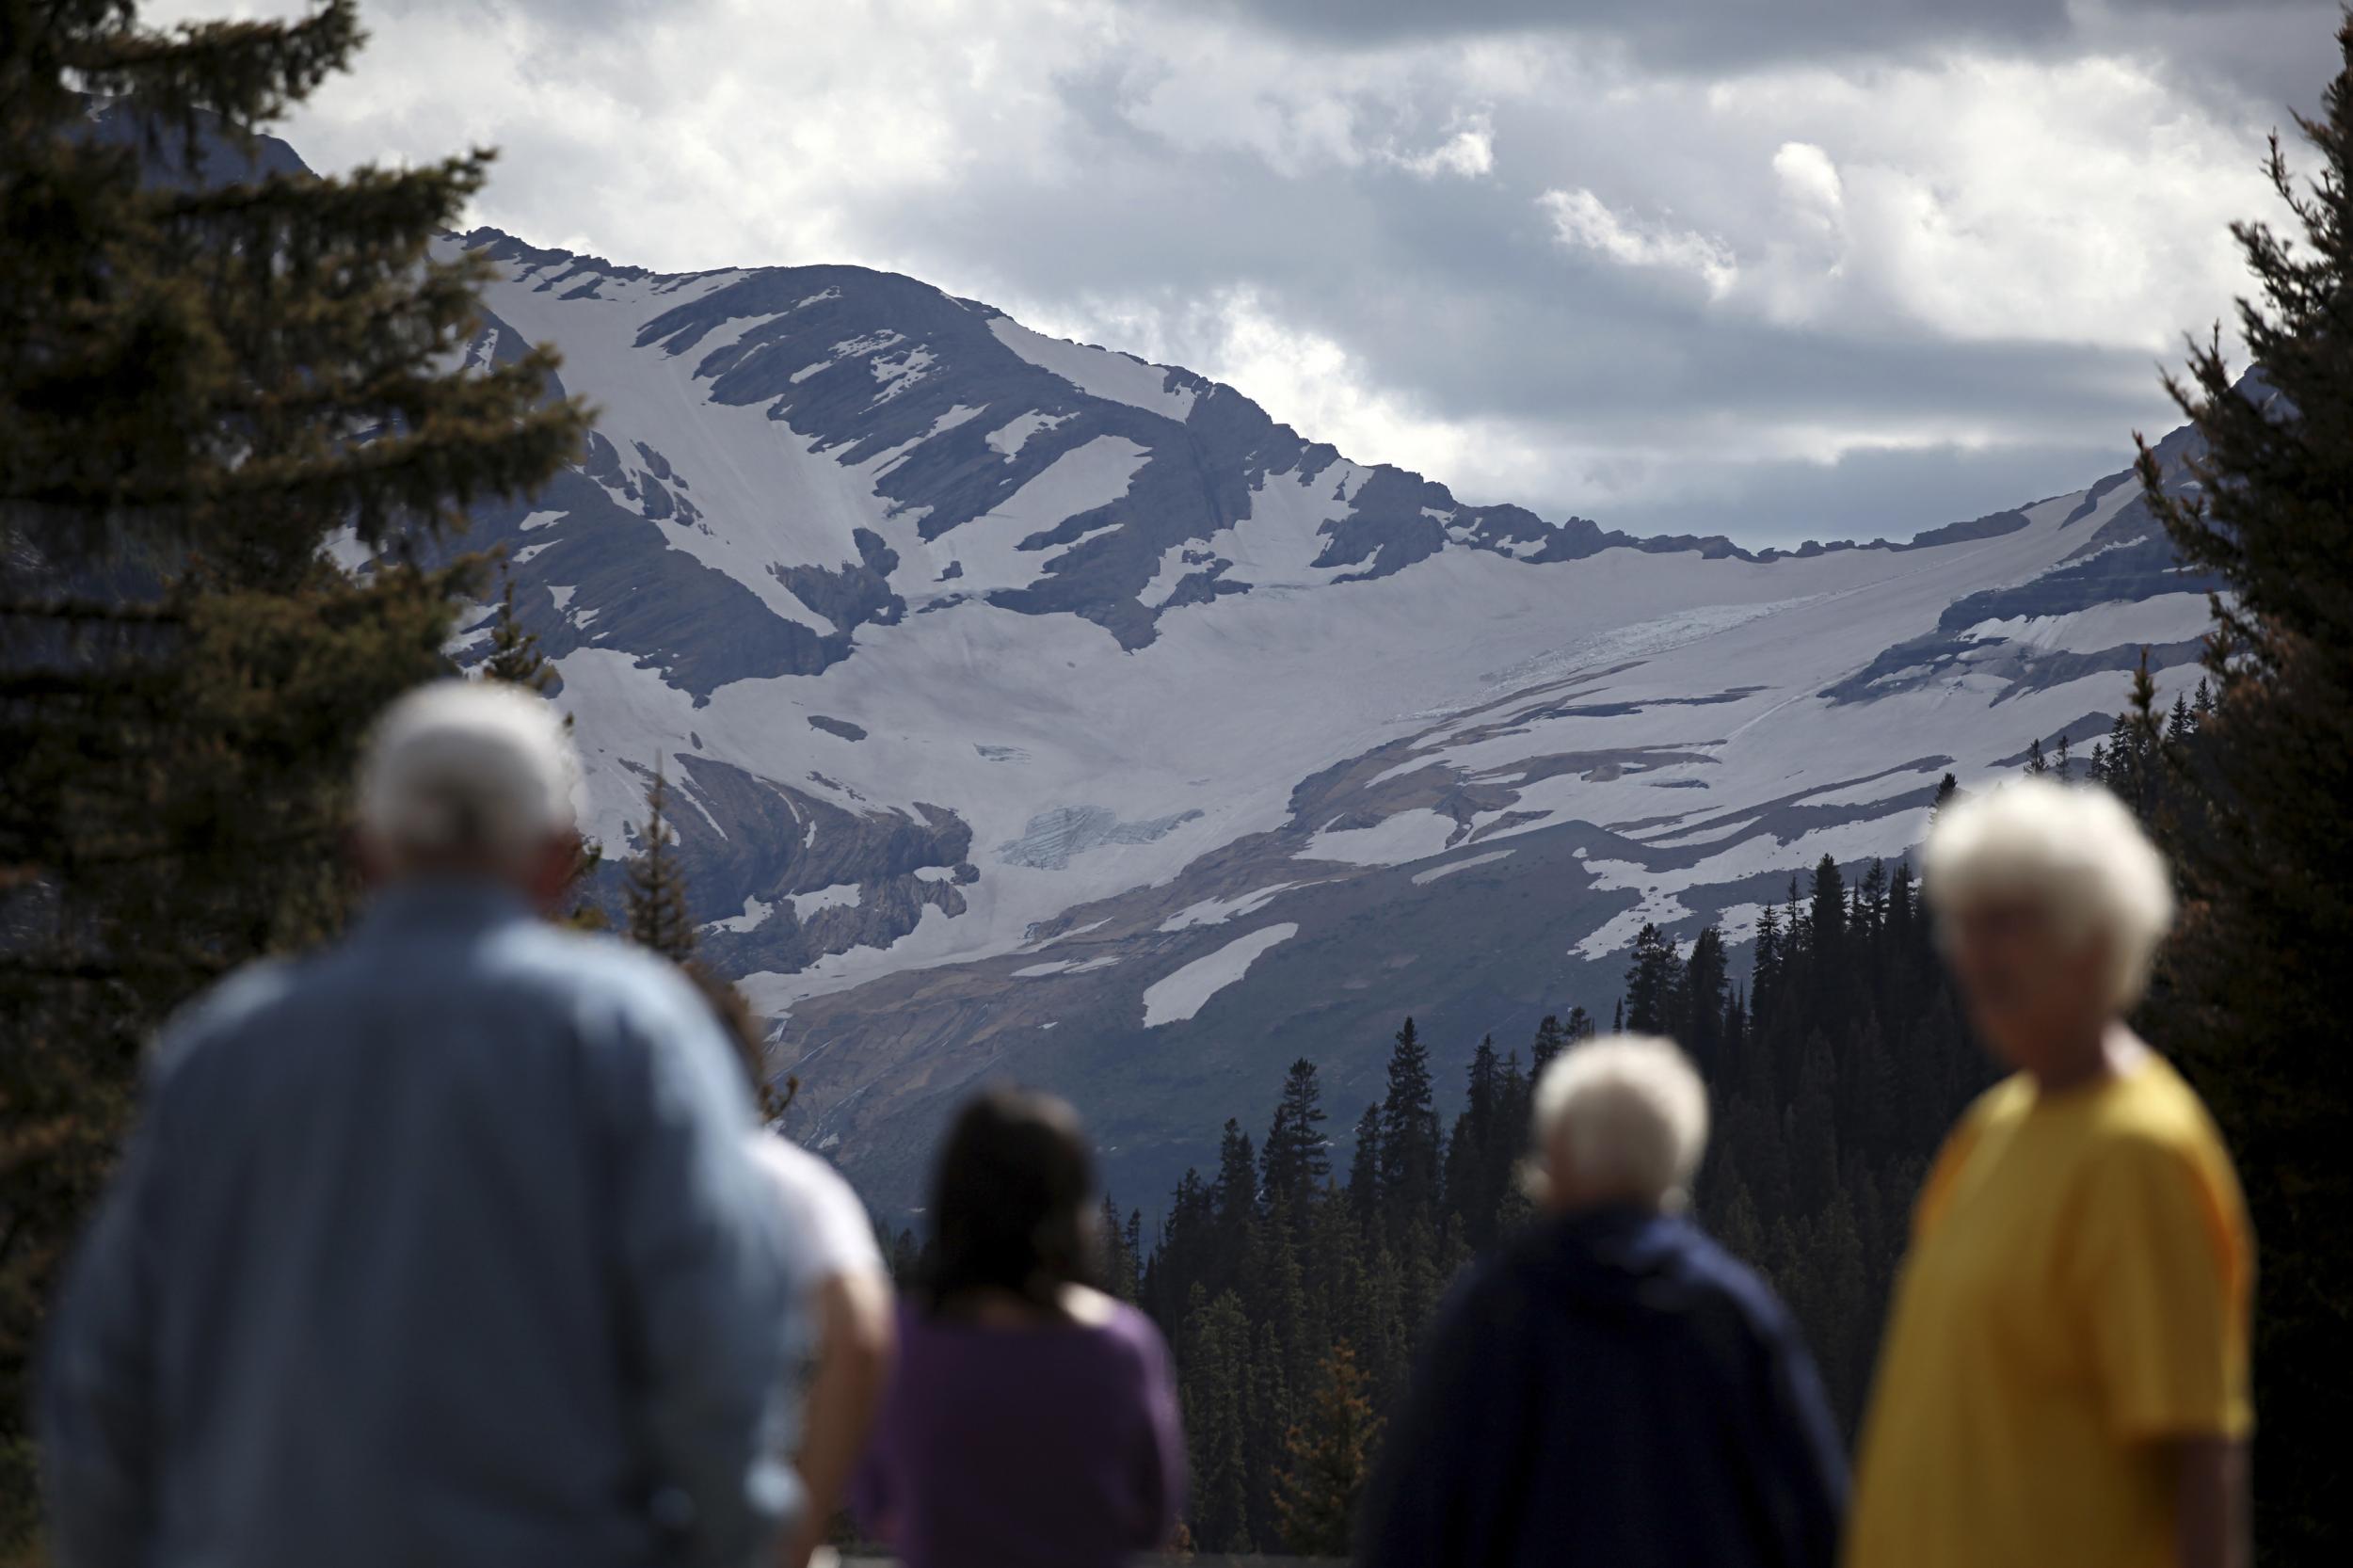 Park visitors gather at the Jackson Glacier Overlook on the east side of Going-to-the-Sun Road in Glacier National Park